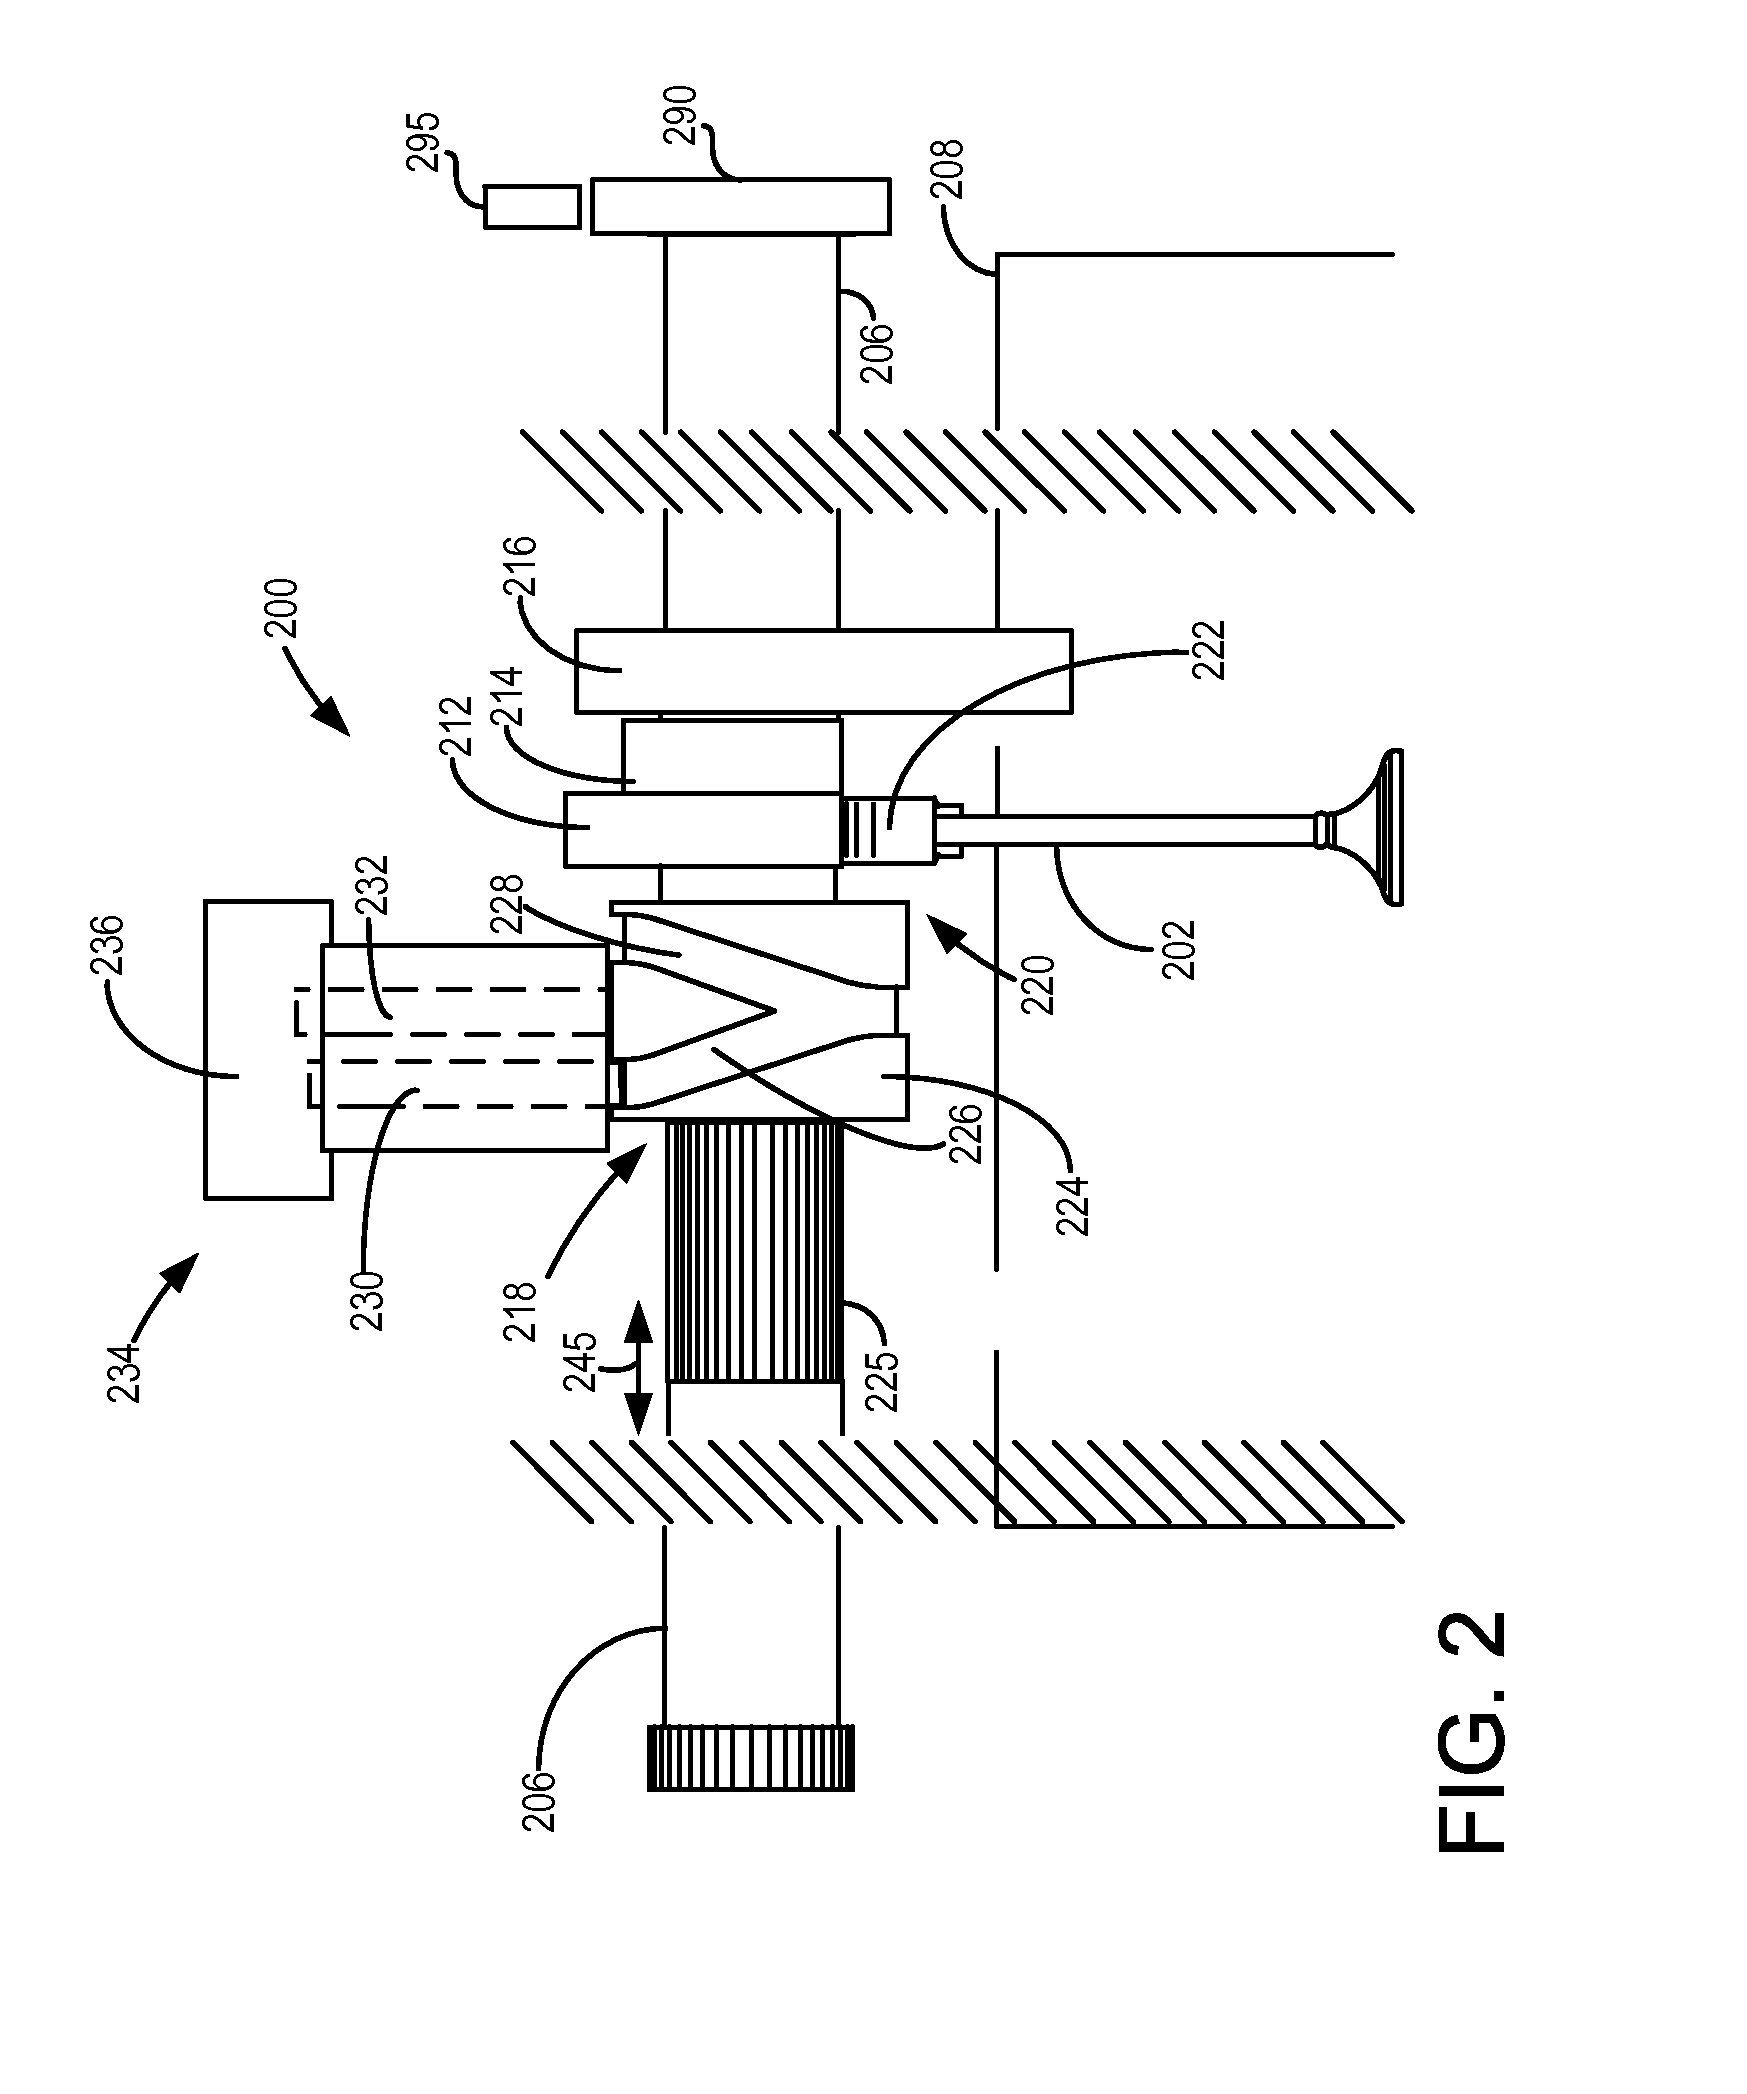 System and method for determining valve operation